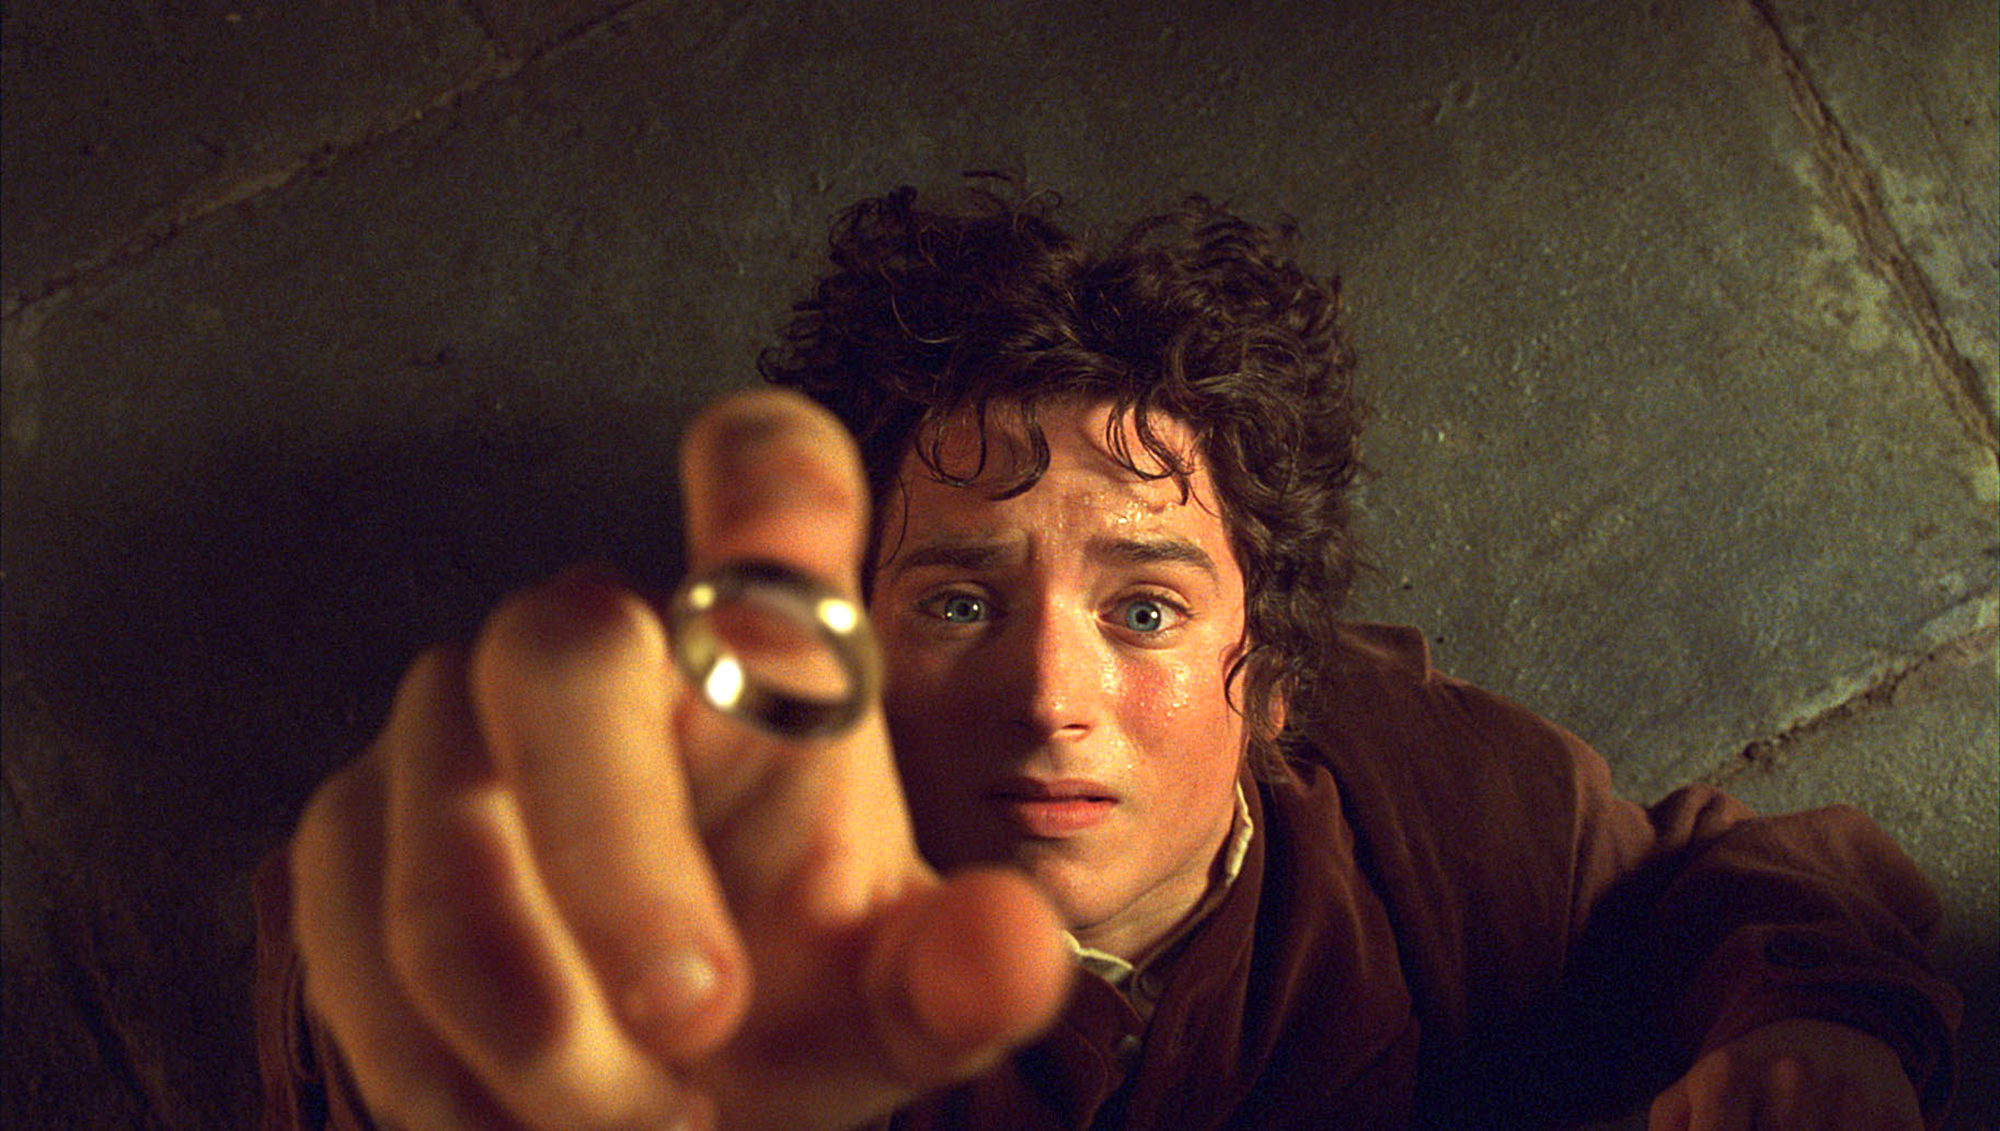 How to Watch All The Lord of the Rings Movies In Order - Where to Stream  The Lord of the Rings and Hobbit Movies